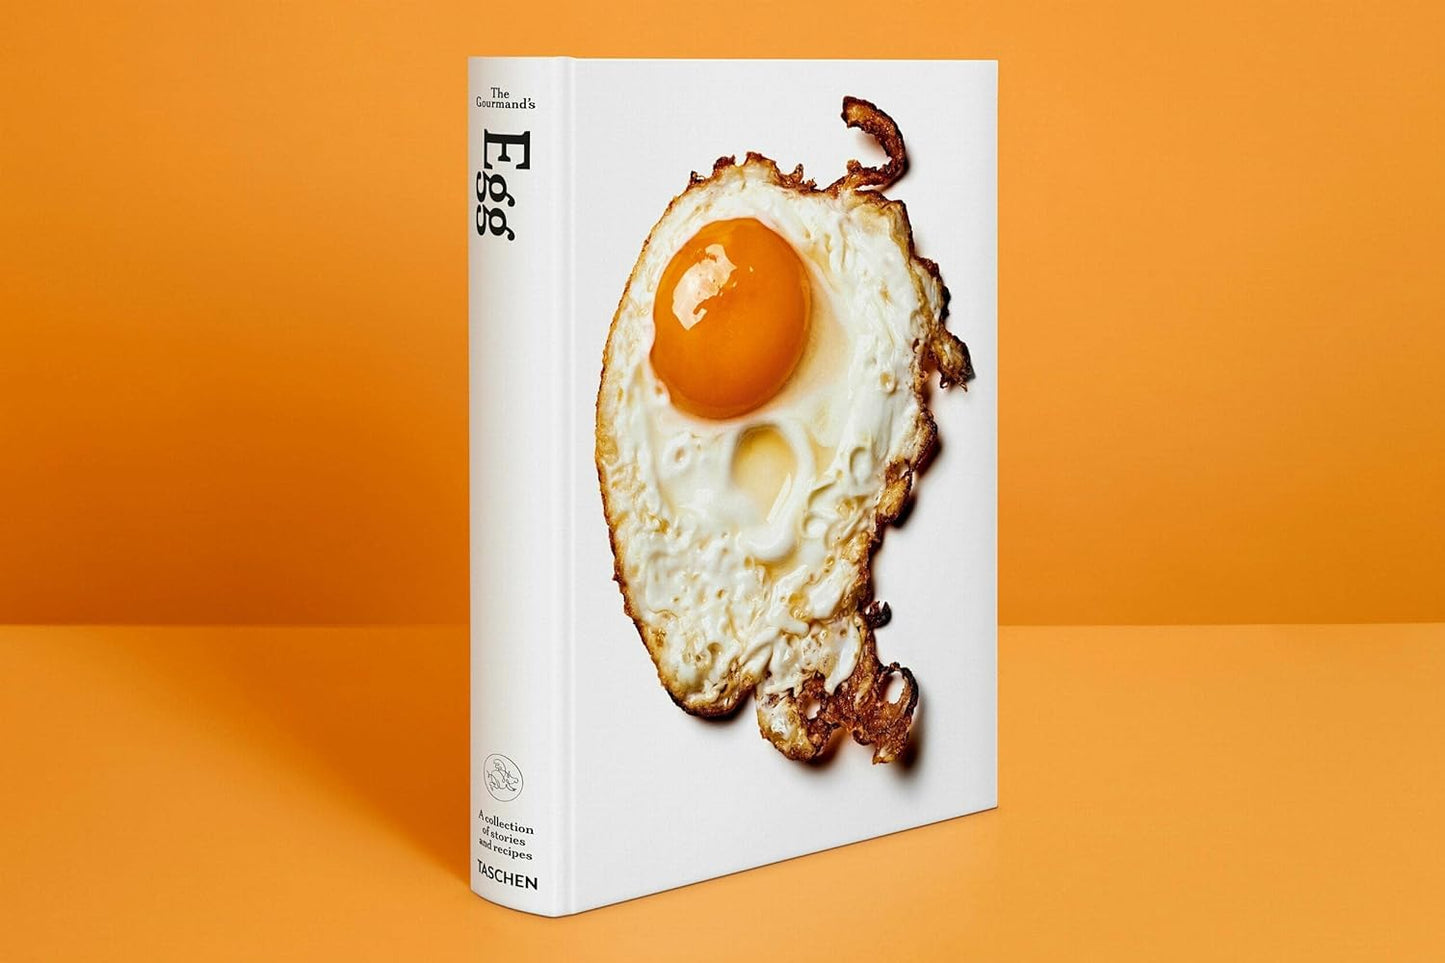 Gourmand's Egg. a Collection of Stories and Recipes